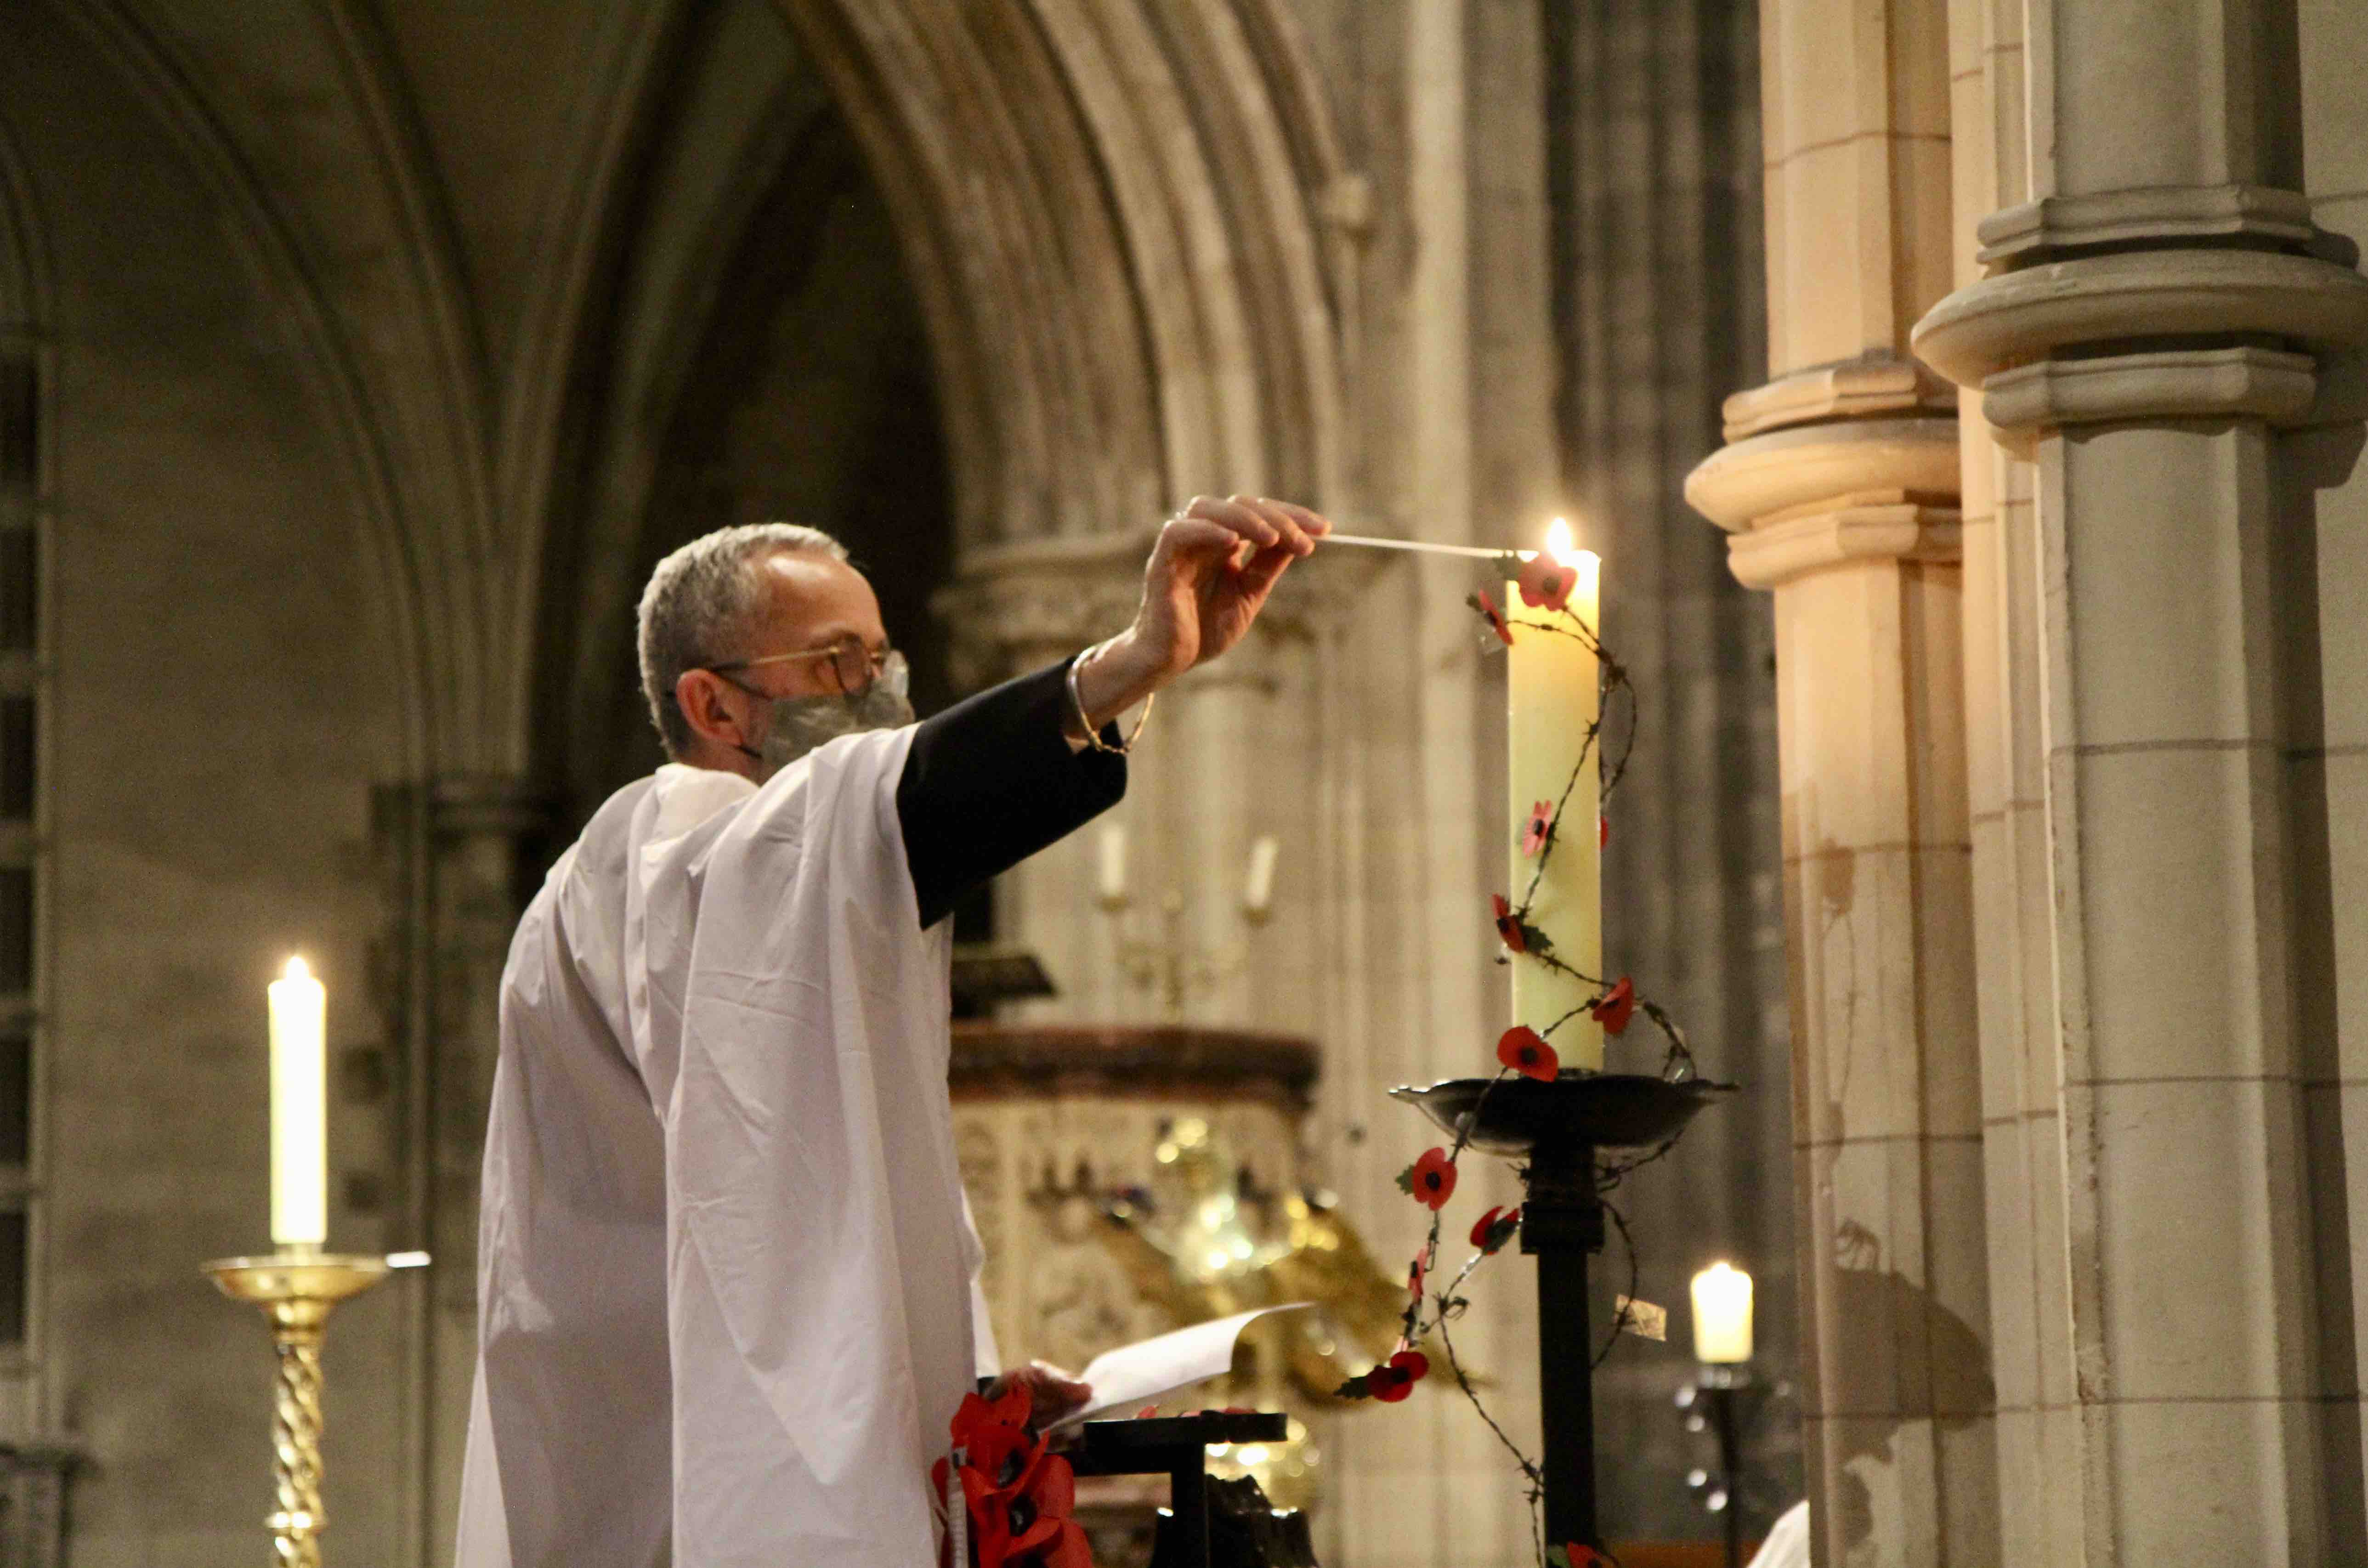 Dean Dermot Dunne lights a candle during the Service of Light. Dean Dermot Dunne, lights a candle during the Service of Light.